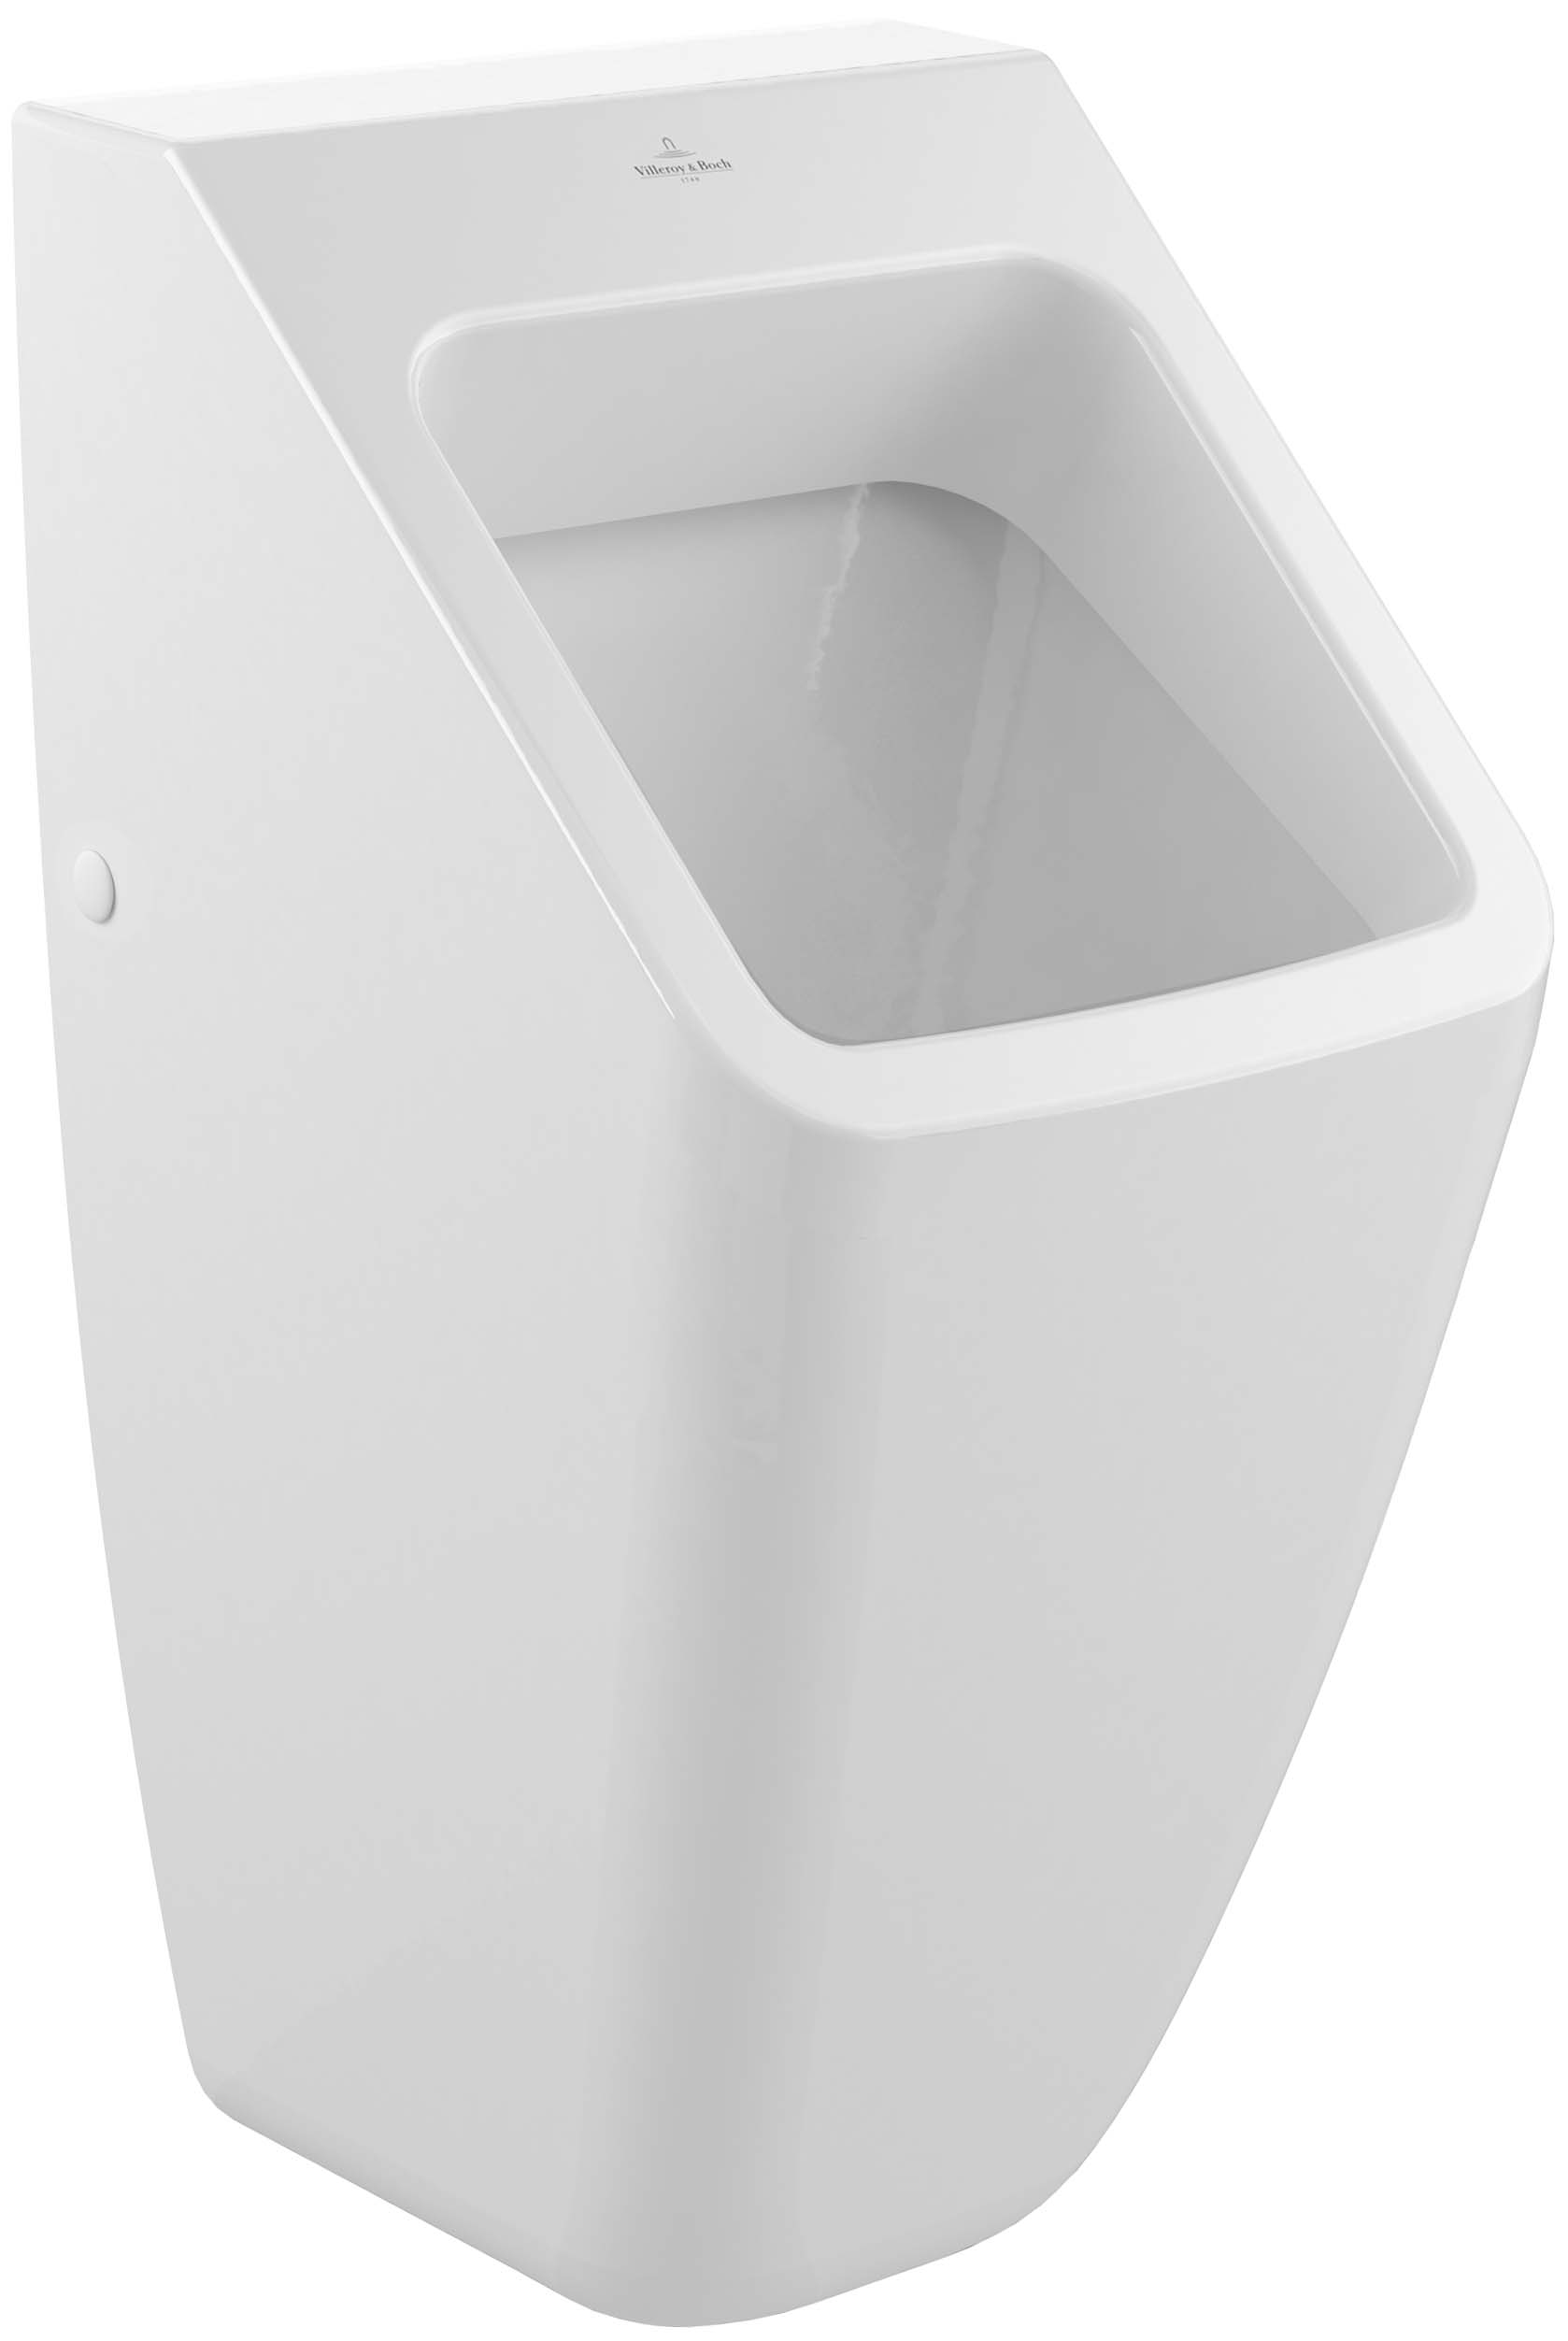 Villeroy & Boch urinal white, front straight, inlet outlet concealed